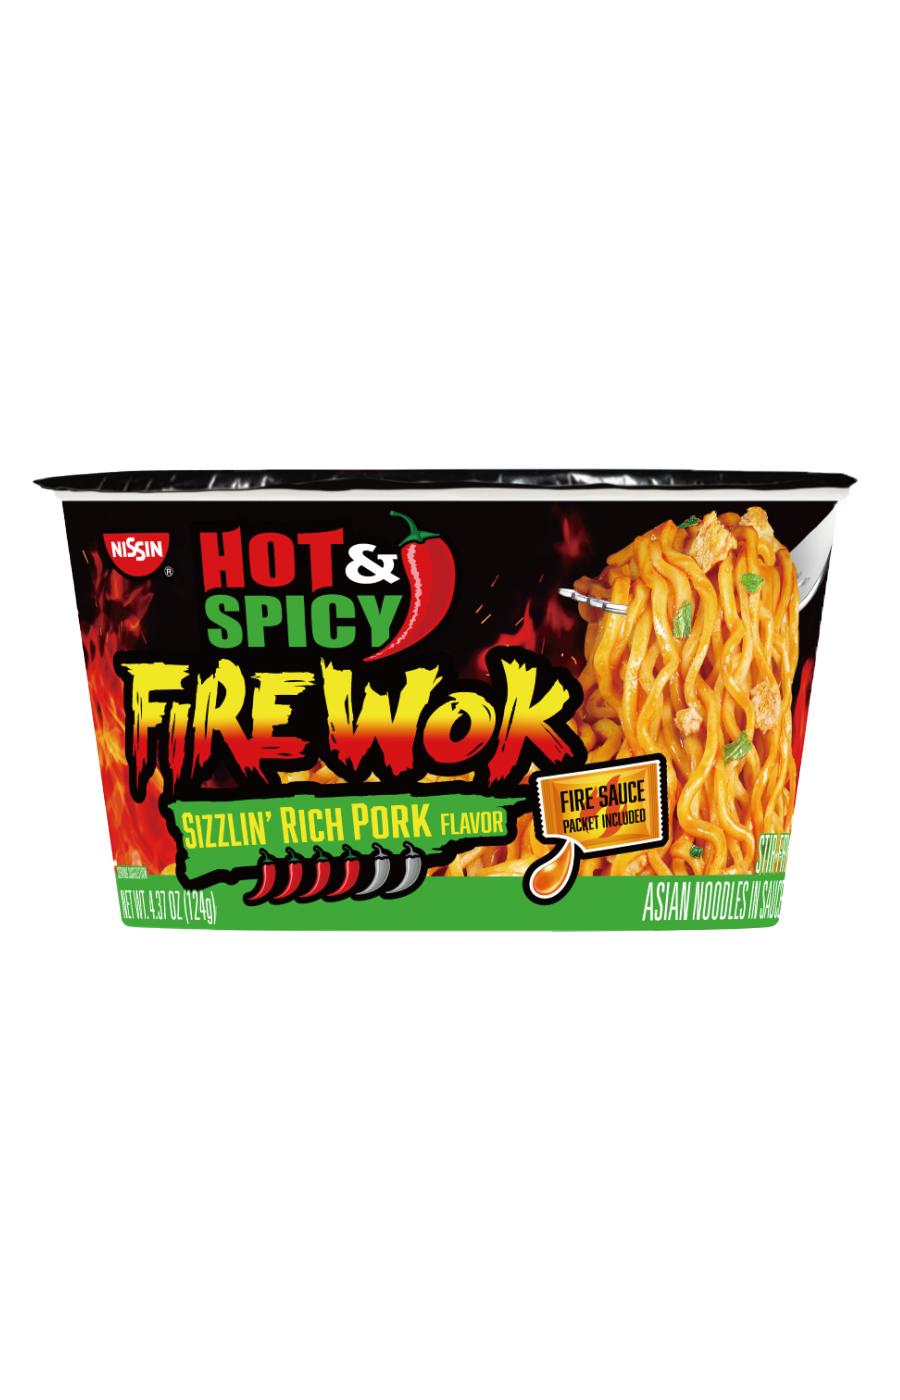 Nissin Hot & Spicy Fire Wok Sizzlin' Rich Pork Noodle Bowl; image 1 of 6